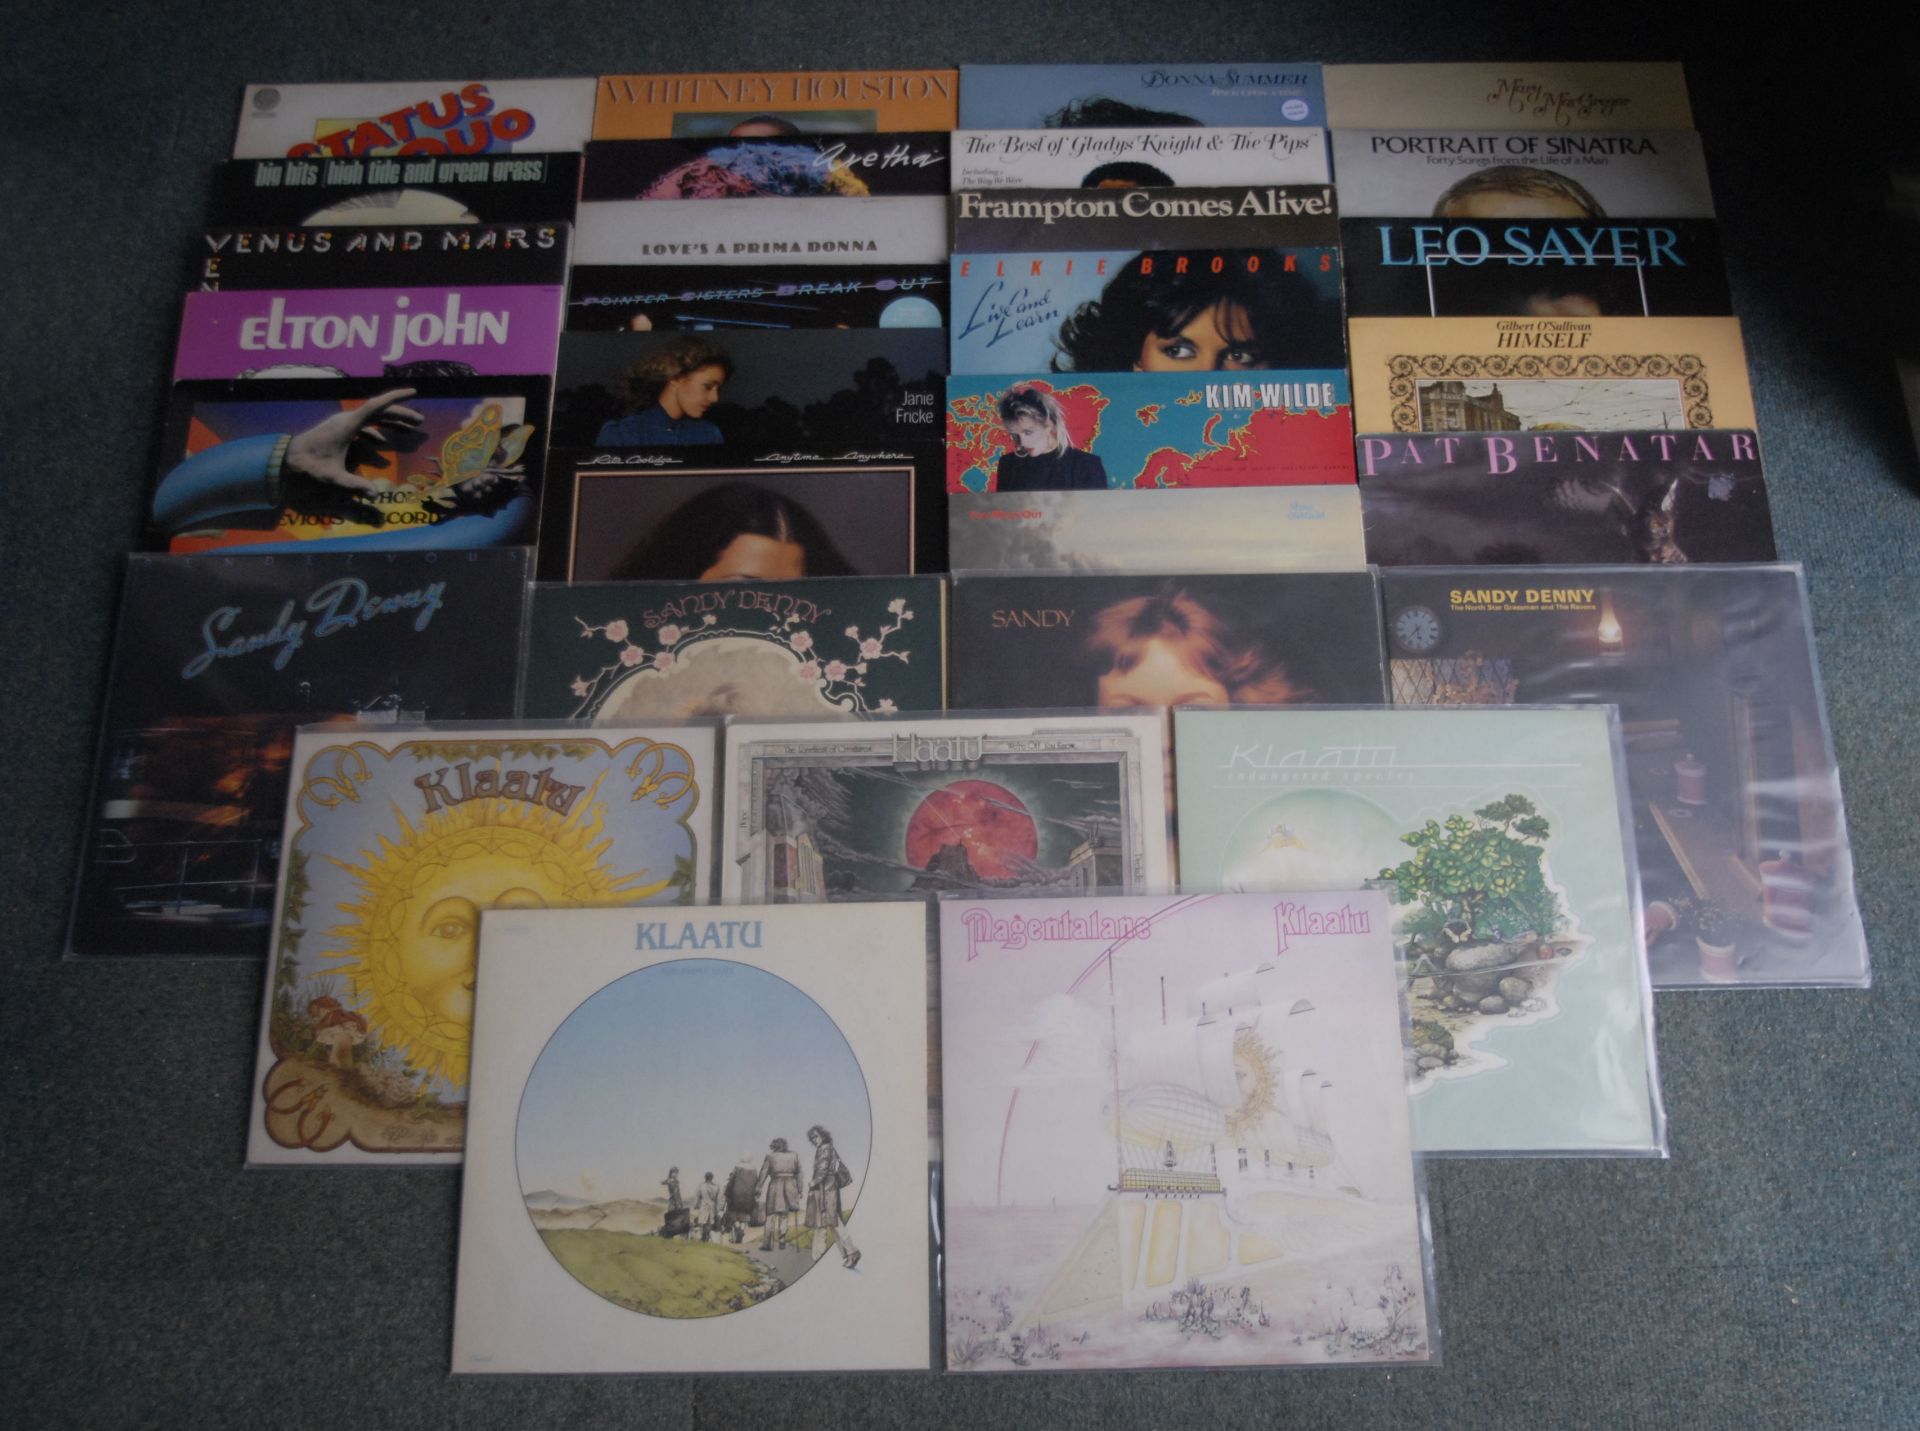 12" LP Records Including All Four Sandy Denny, and